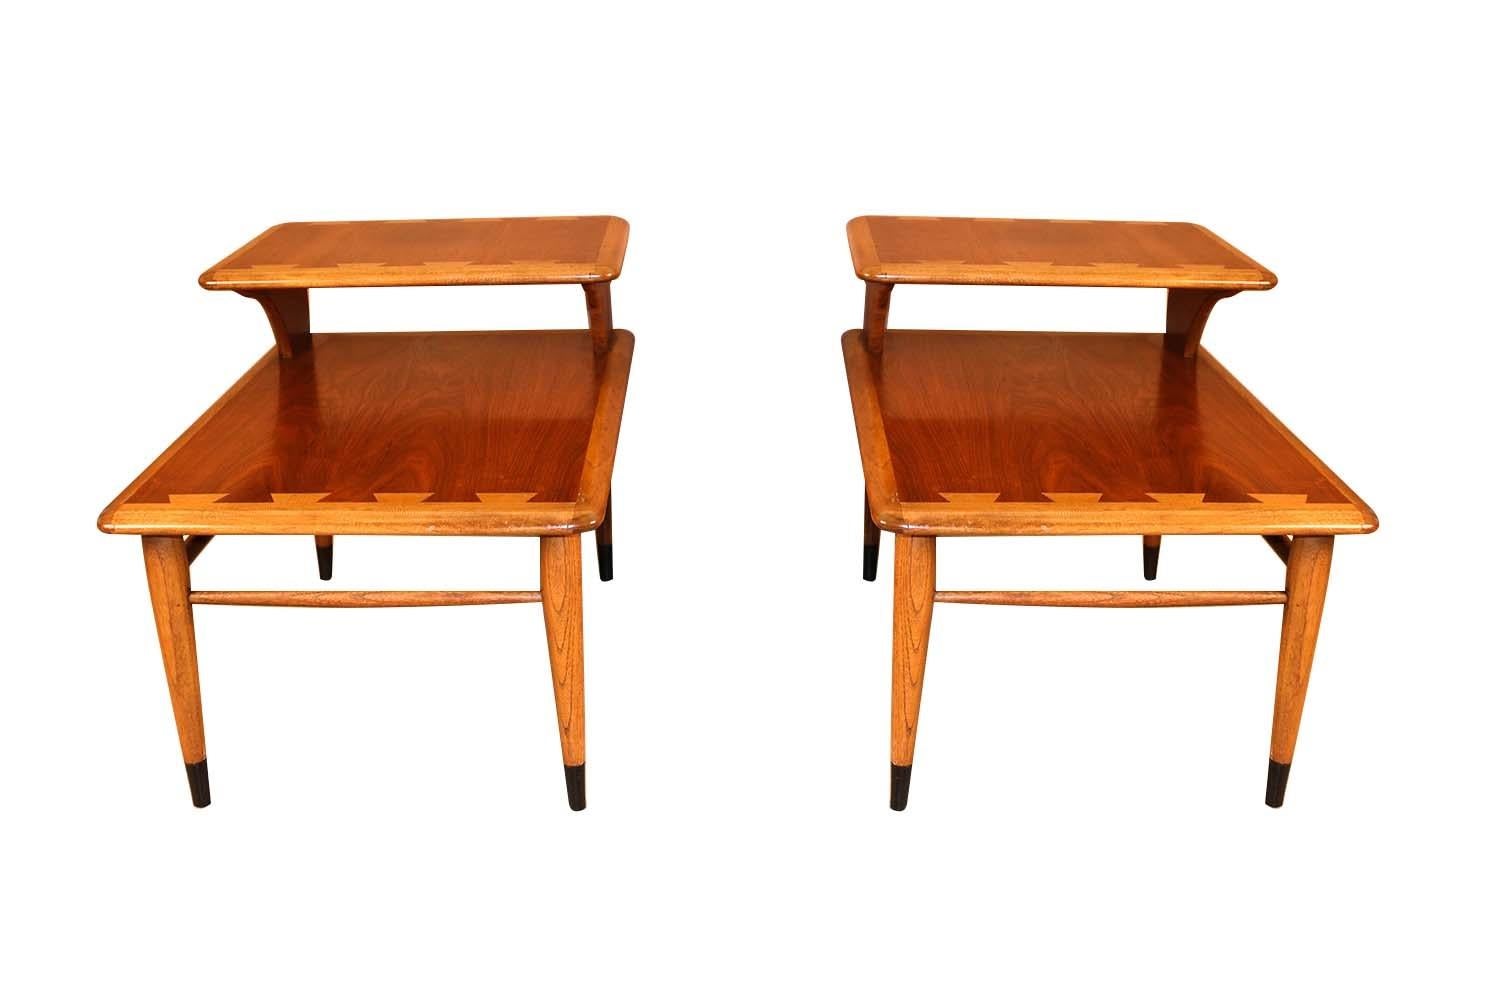 A beautiful pair of two-tier step-up end tables by Lane Furniture Co. from the Lane ‘Acclaim’ collection, designed by Andre Bus. Remains in good condition throughout. Featuring stunning, two tier, signature dovetailed design, in a vivid contrast